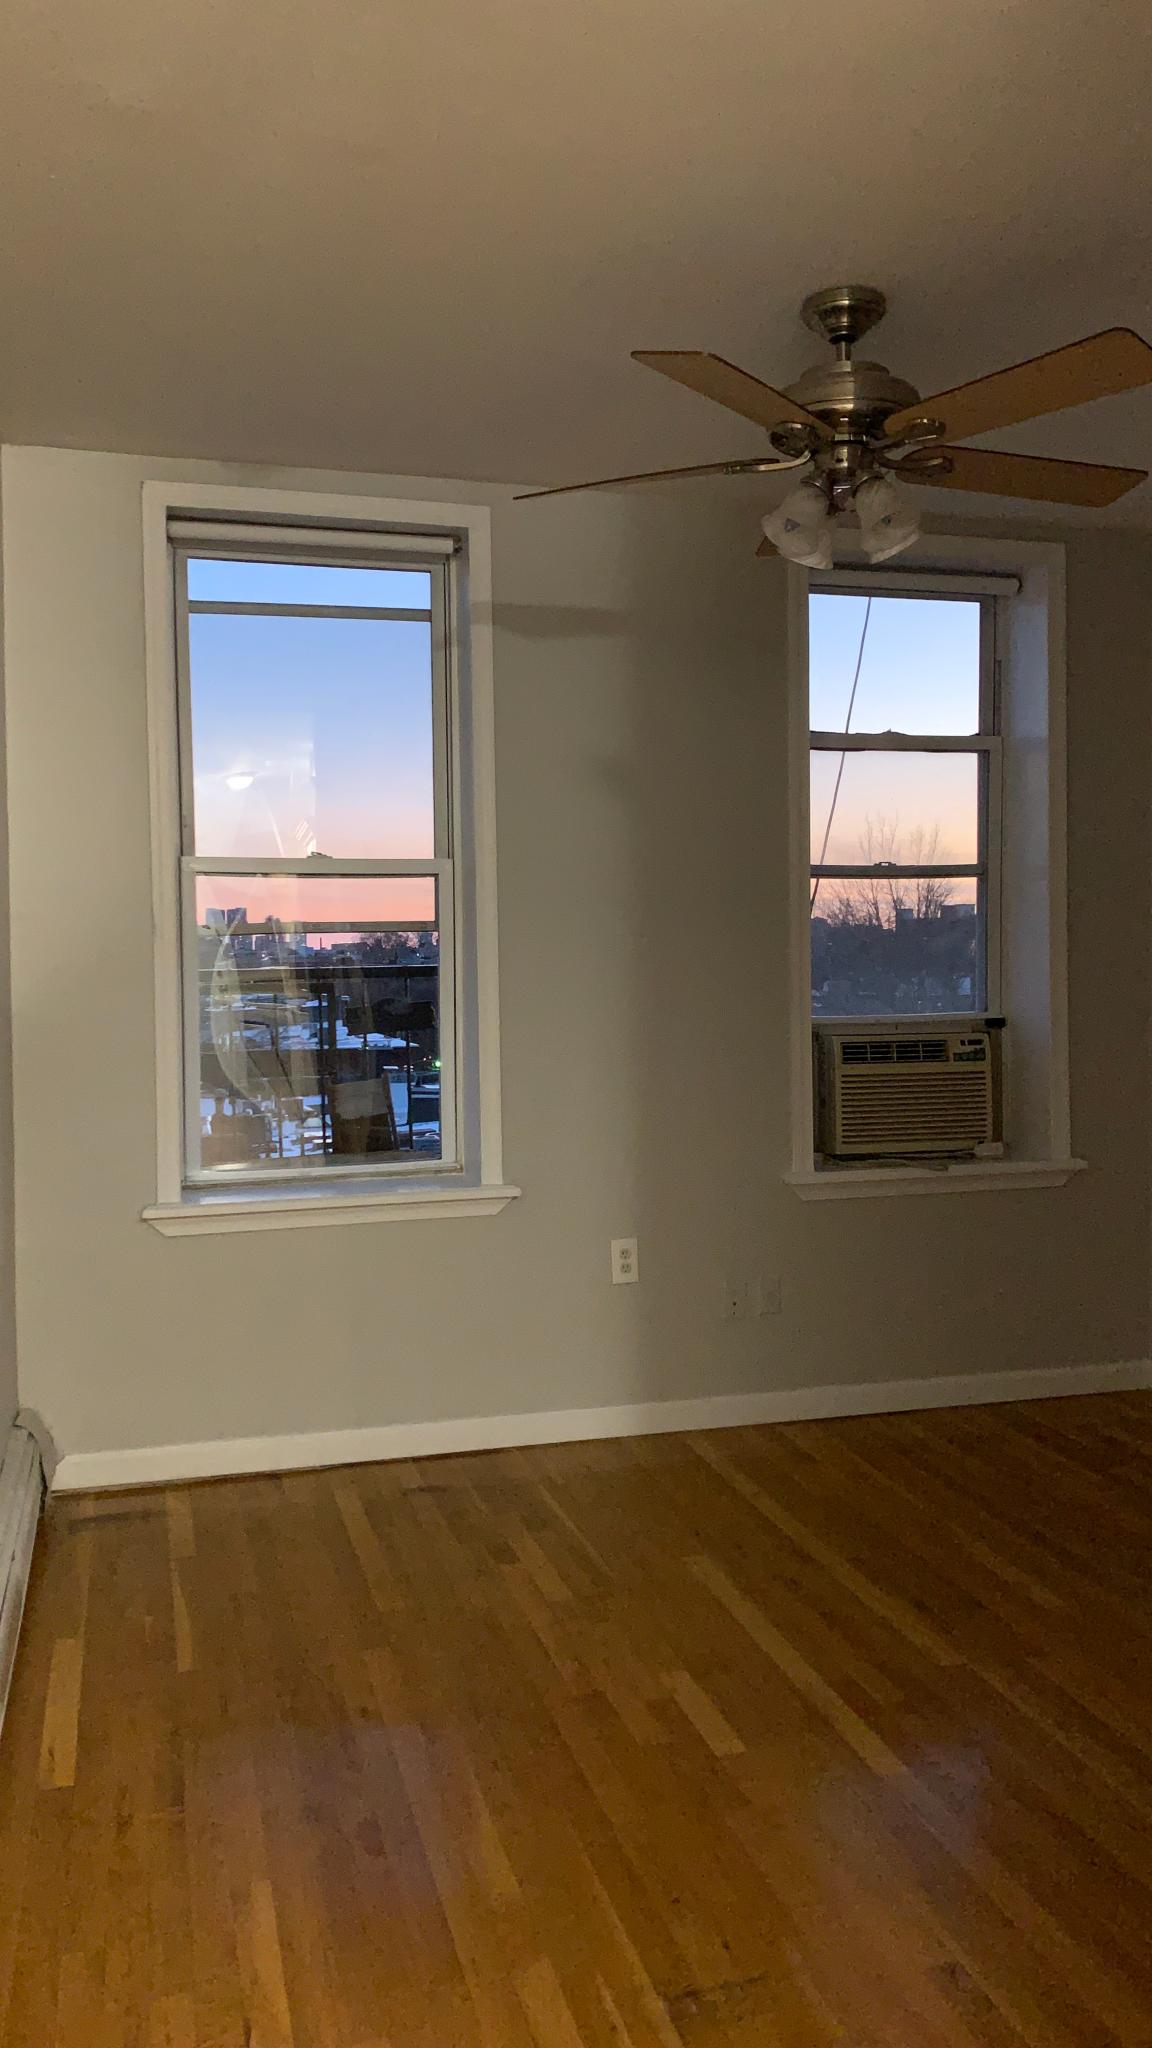 Renovated, cozy 1 BR apartment, private top floor, high ceilings and tall windows allow for lot of natural light, sunny with some NY city views, updated kitchen and bathroom. Located in uptown Hoboken, right on 14th St, NY bus stop right at your door step, short walk to Ferry, great for a commuter to NY City, quick access in and out of Manhattan. available for April 1st. -  monthly rent $1,650.- security deposit 1.5mo $2,475.- call or text to listing agent for more info and a tour.